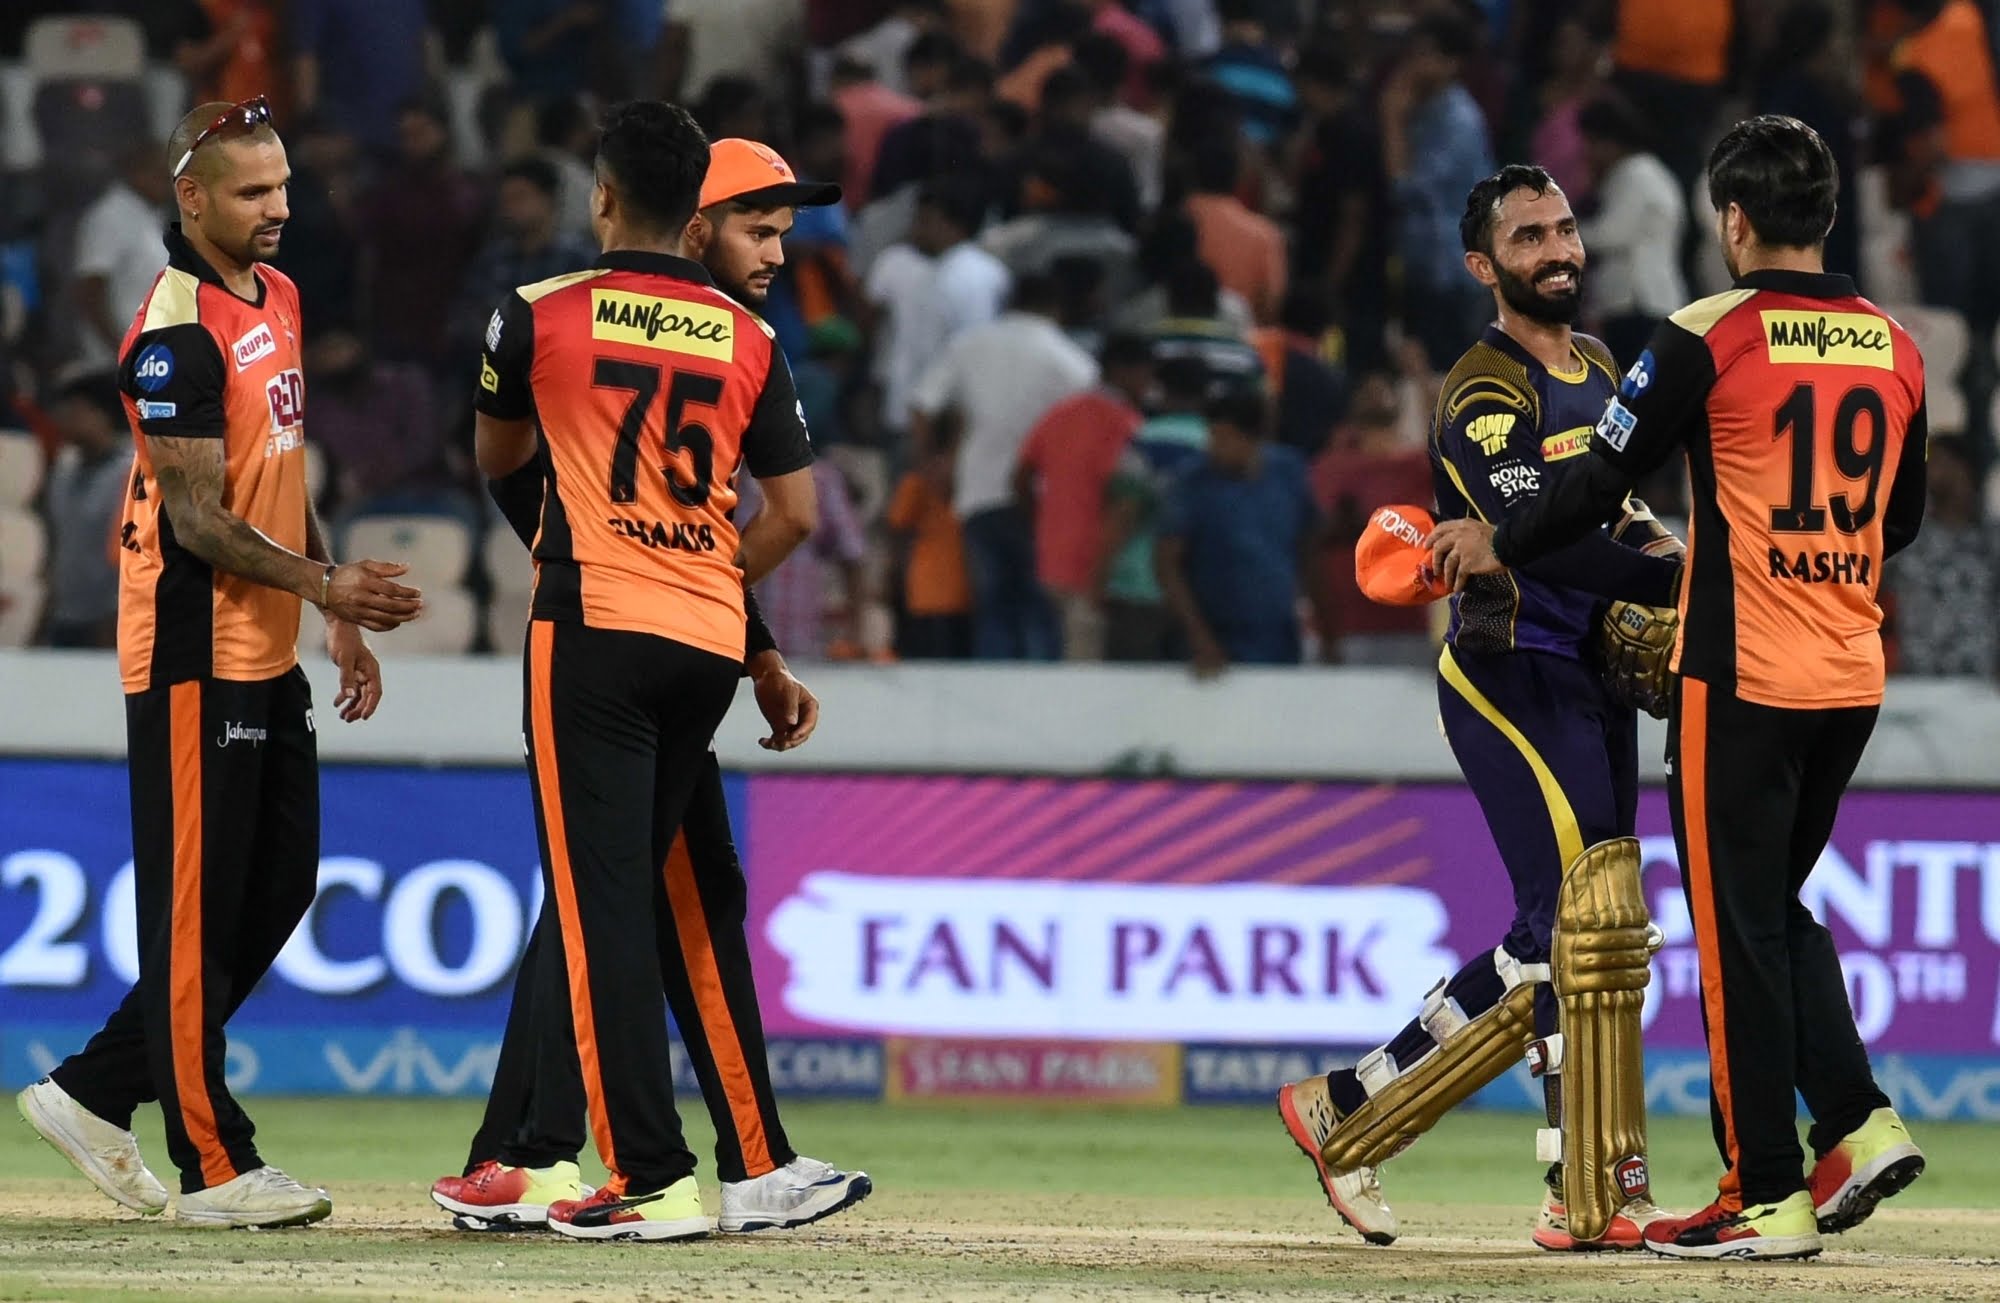 IPL 2019 Match 38 (SRH vs KKR) – Five Things To Watchout In The Game